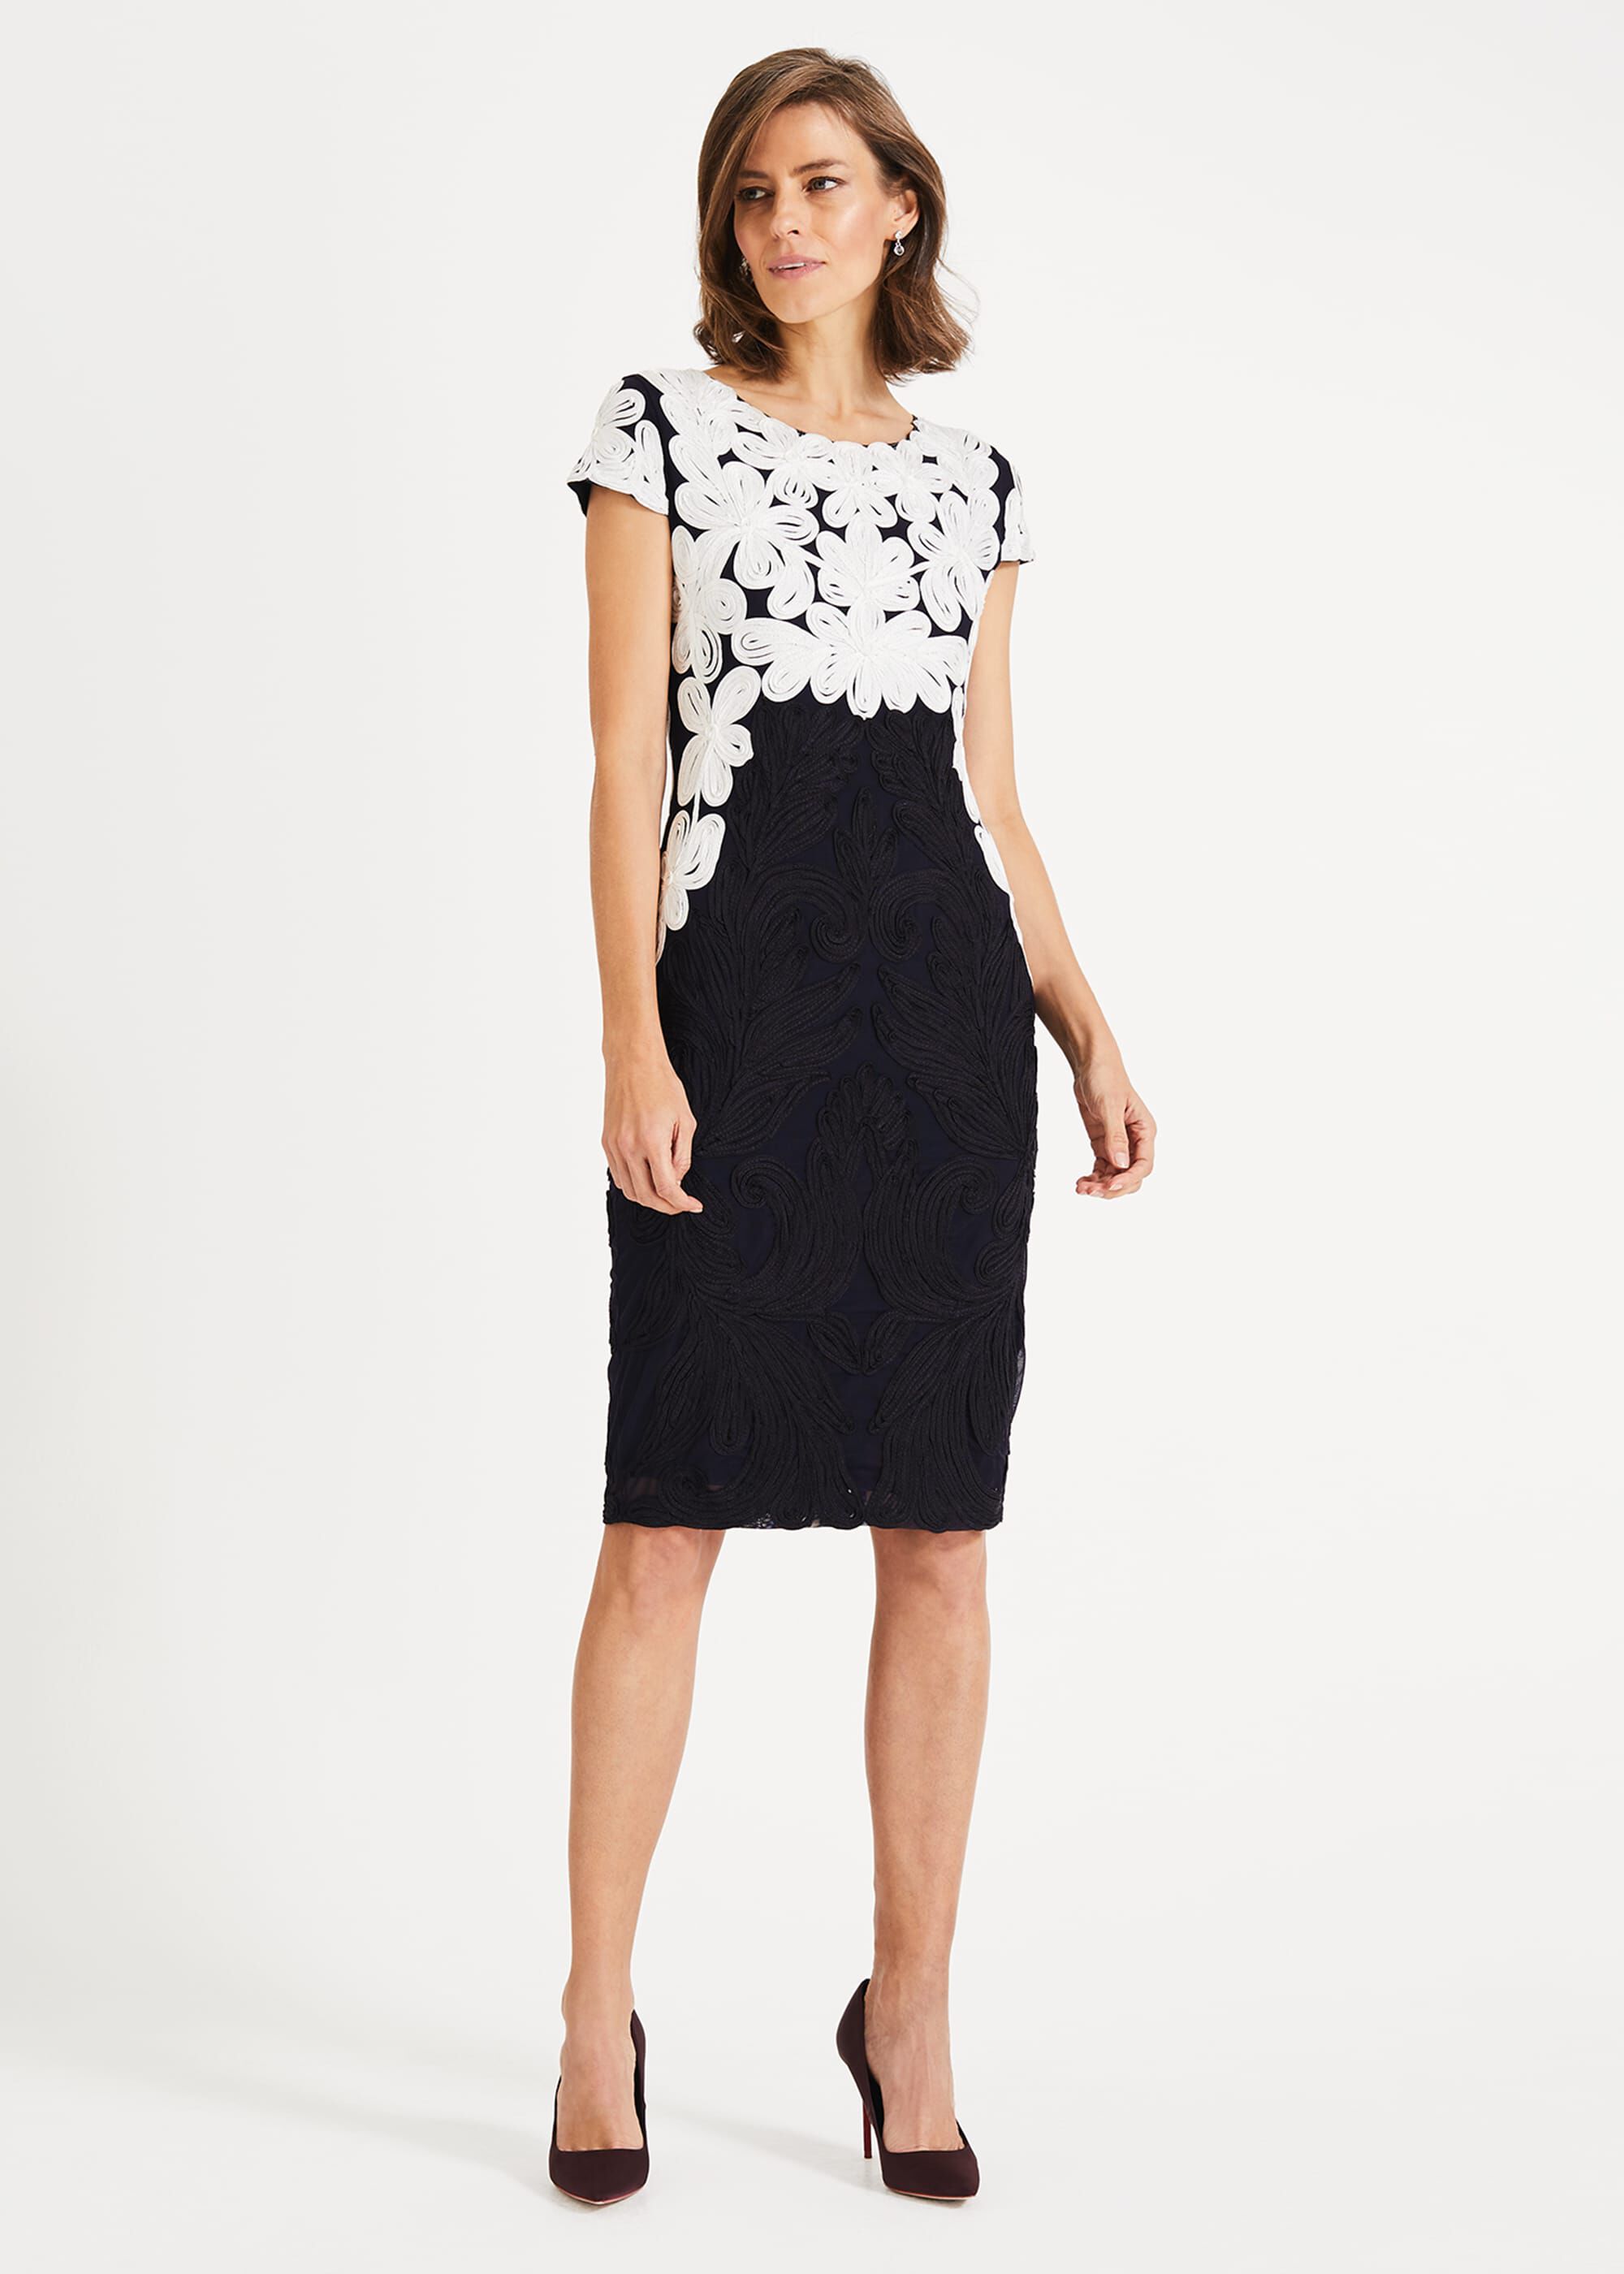 Phase Eight Dresses Uk Shop, 52% OFF | andreamotis.com